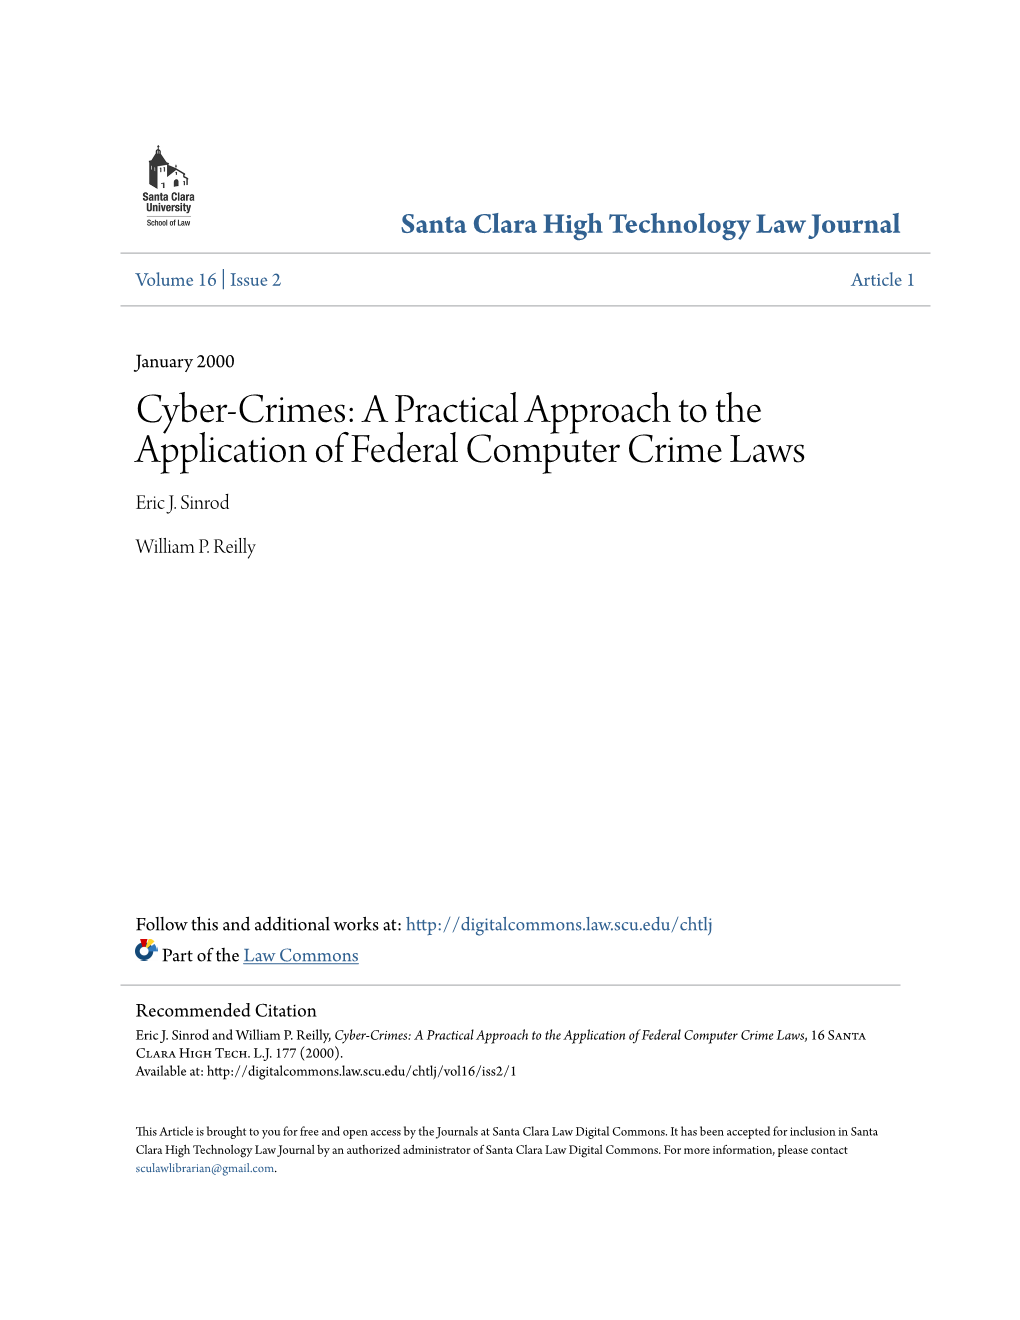 Cyber-Crimes: a Practical Approach to the Application of Federal Computer Crime Laws Eric J